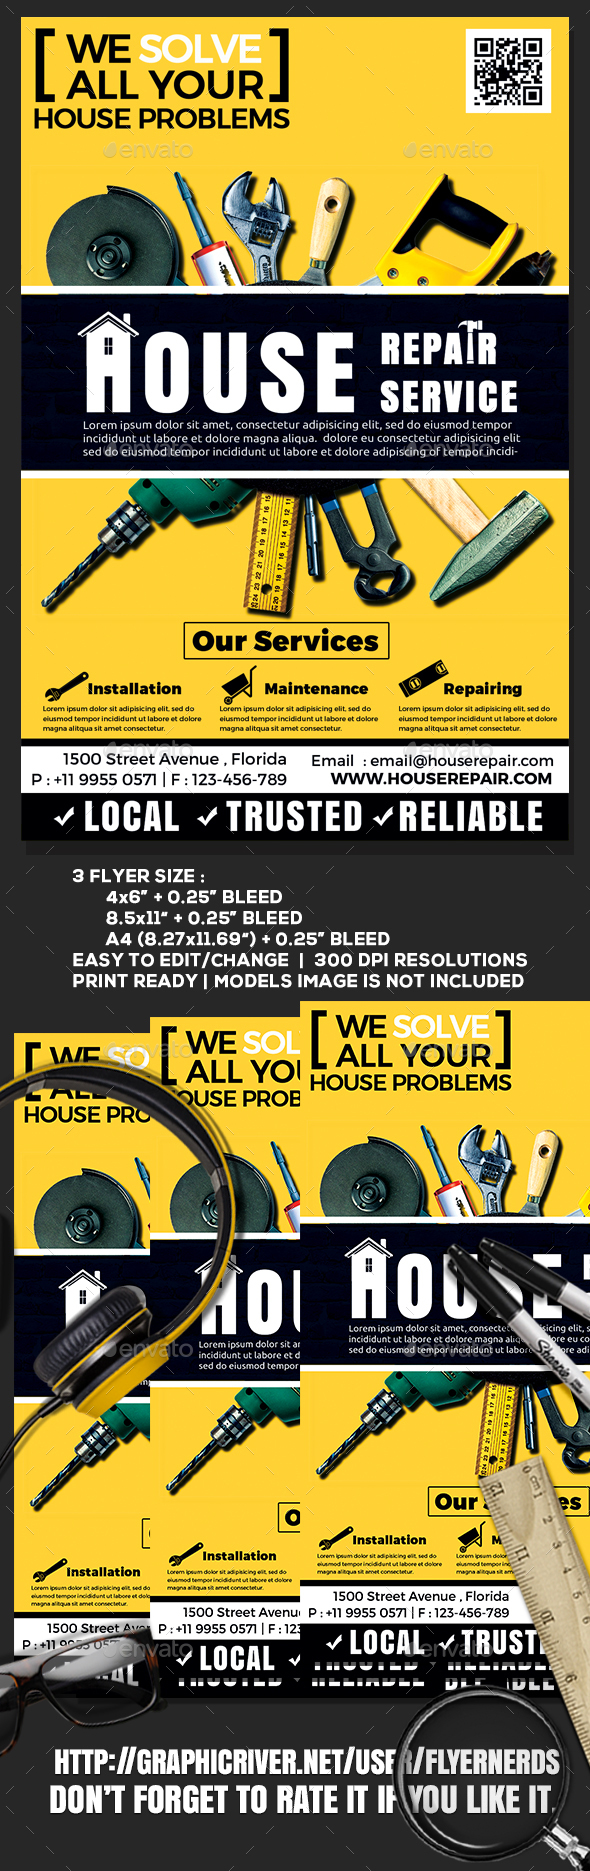 House Repair Company Service Flyer